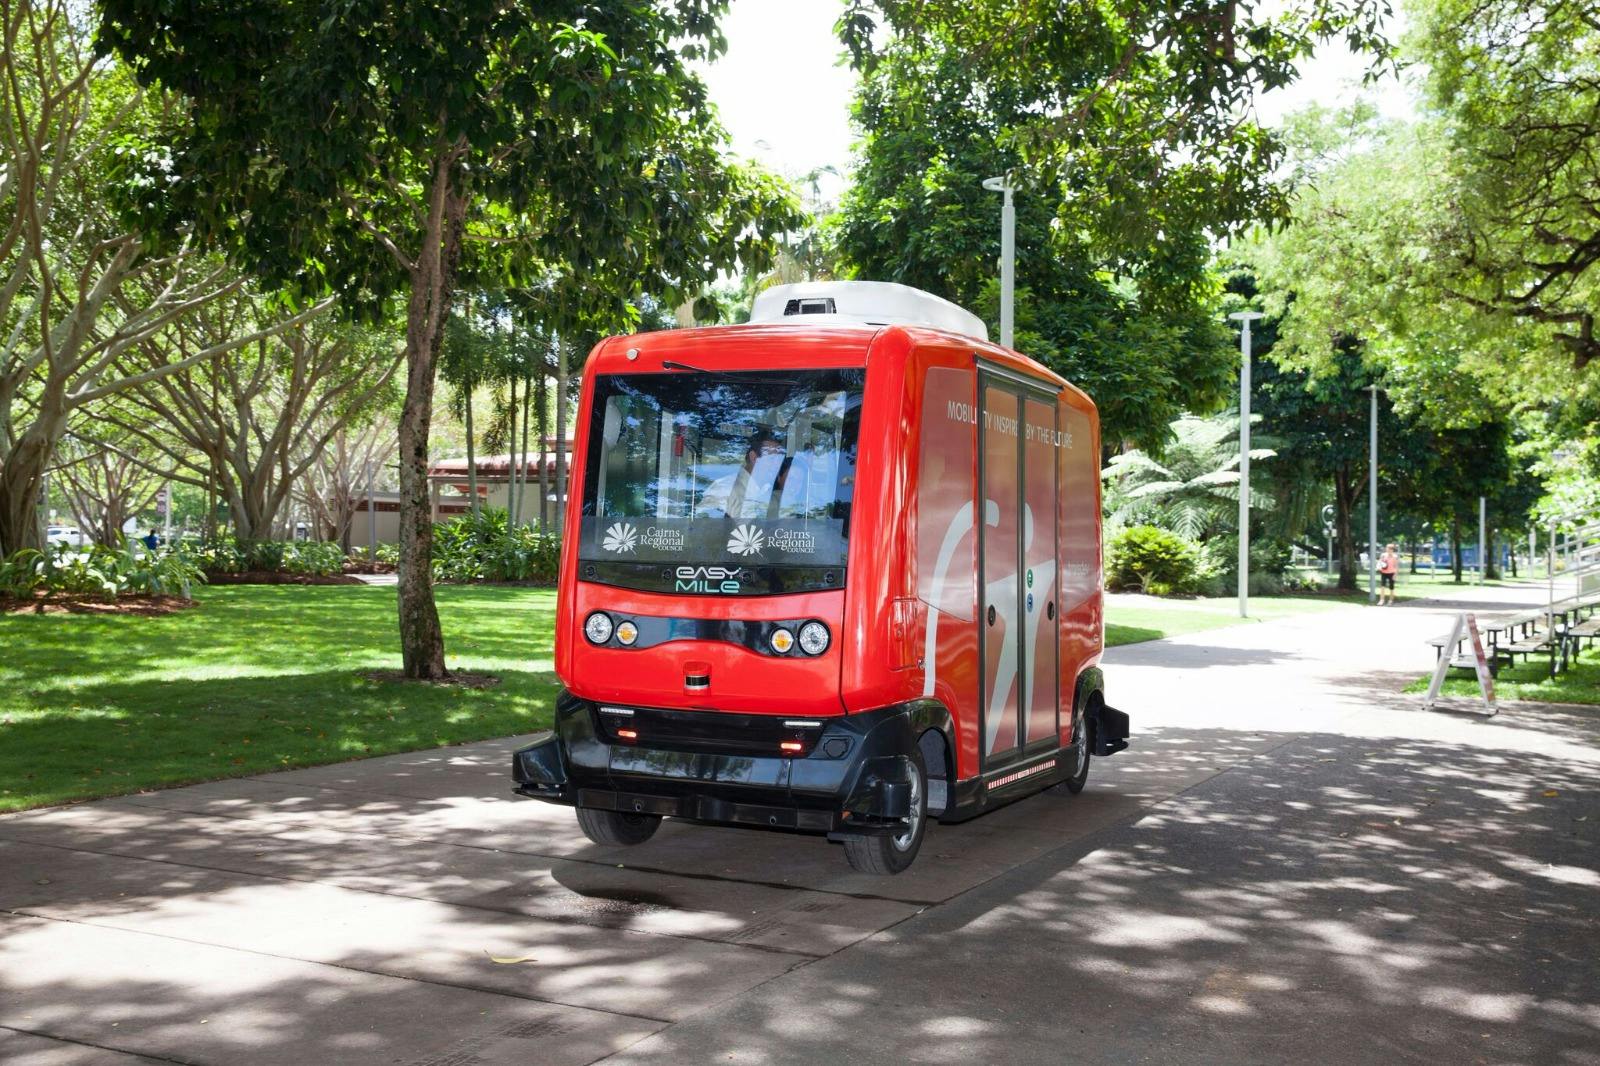 Cairns automated vehicle trial image